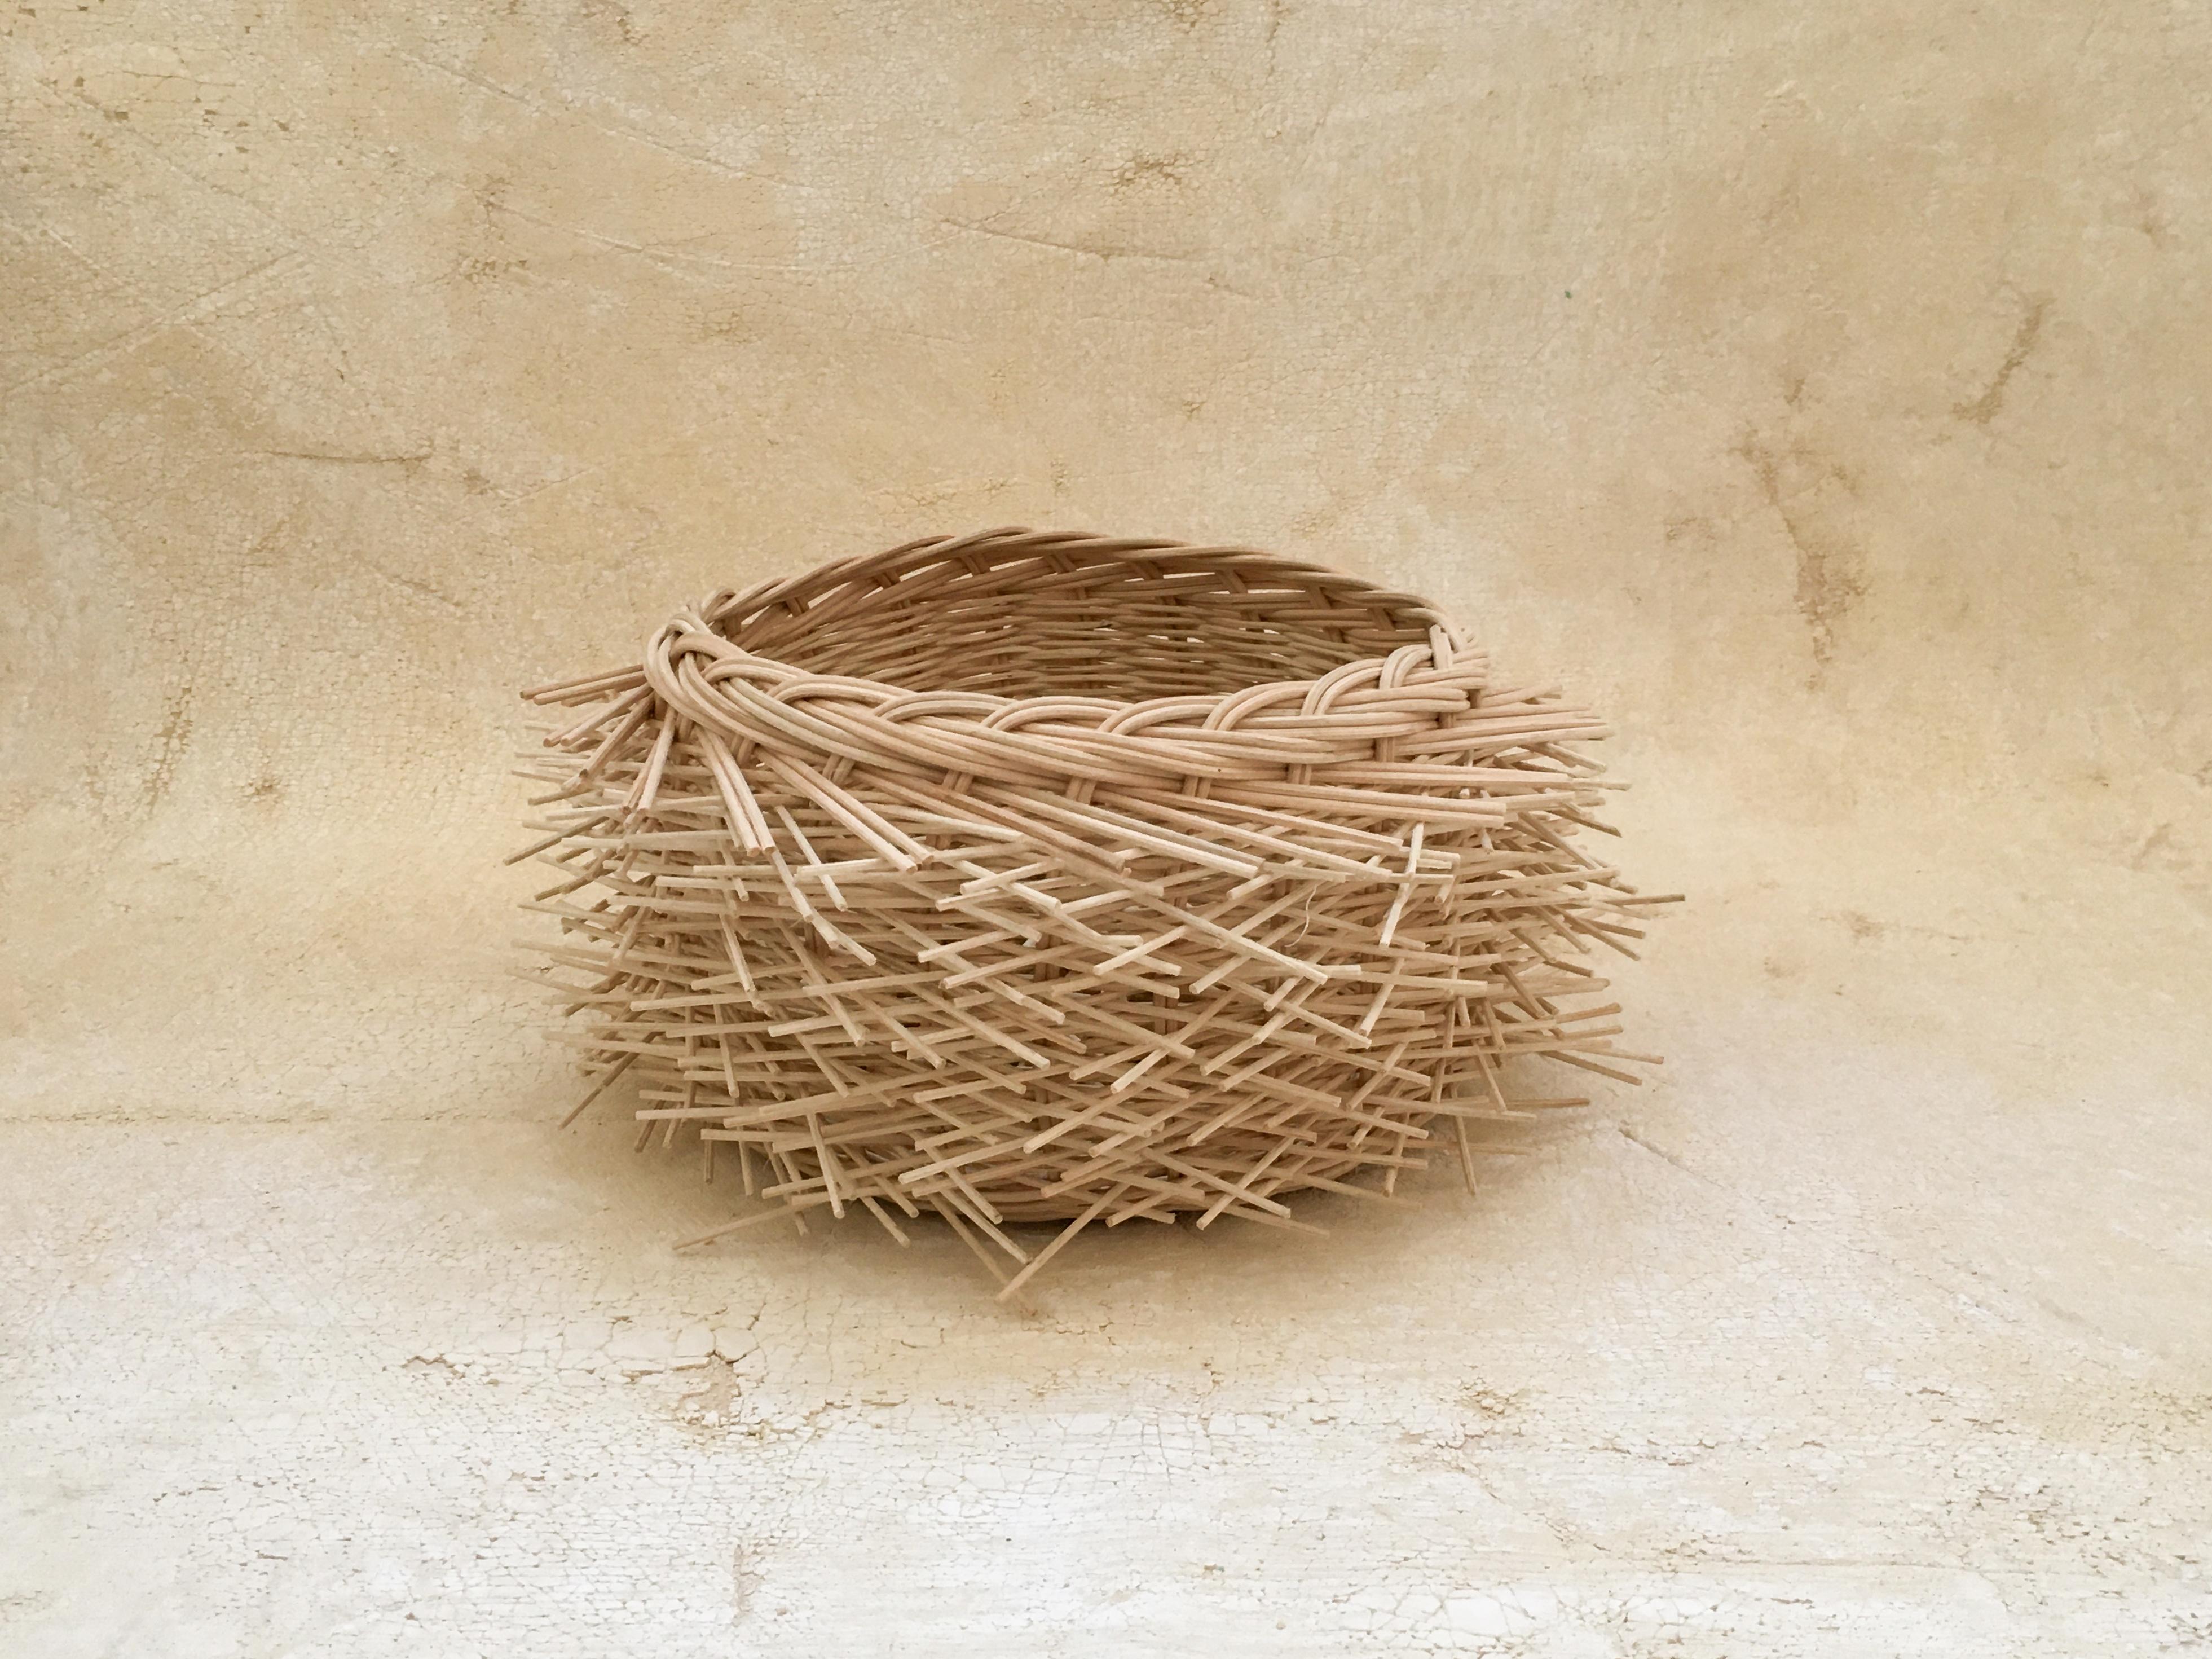 Tortillero Erizo basket by Onora
Dimensions: D 27 x 12 cm
Materials: Woven Wicker

Our new on going basket collection explores a sea urchin aesthetic. Handwoven by master weavers from the State of Mexico.

We are a Mexican brand dedicated to